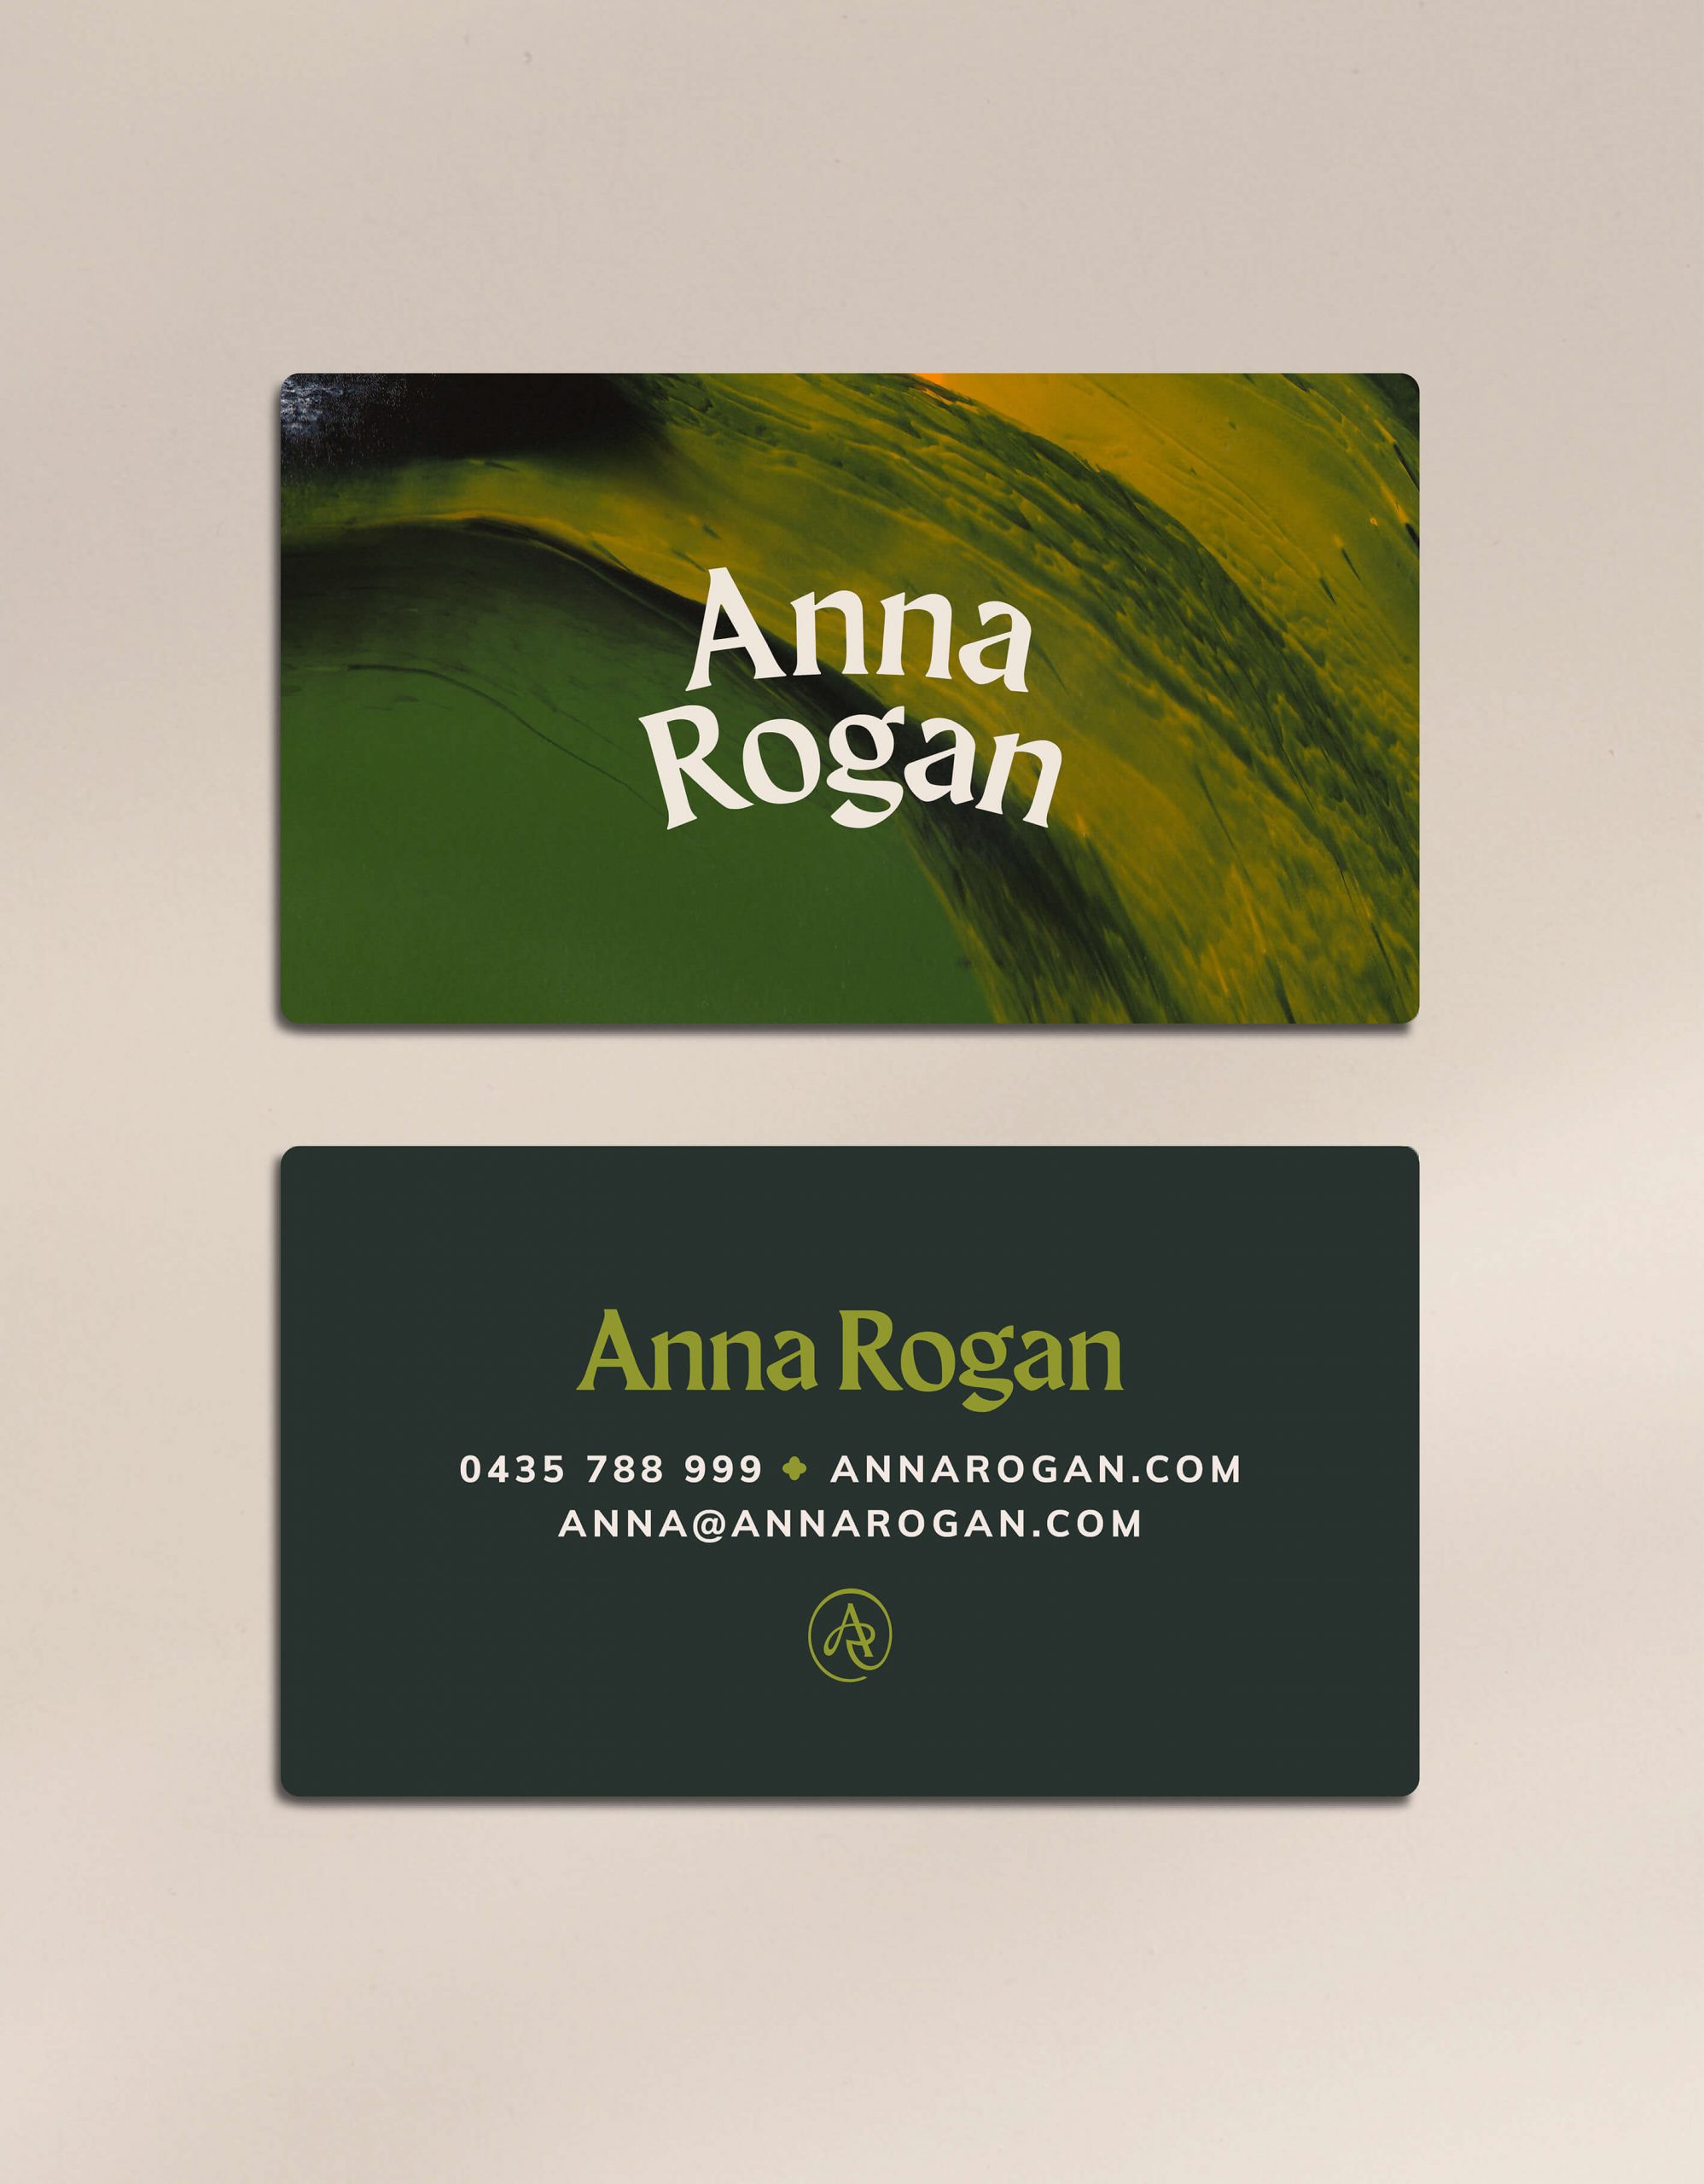 Rebranding case study image of the Anna Rogan business cards with rounded corners on a cream coloured background. The front showcases the brand paint graphic and logo while the green back showcases Anna’s details.